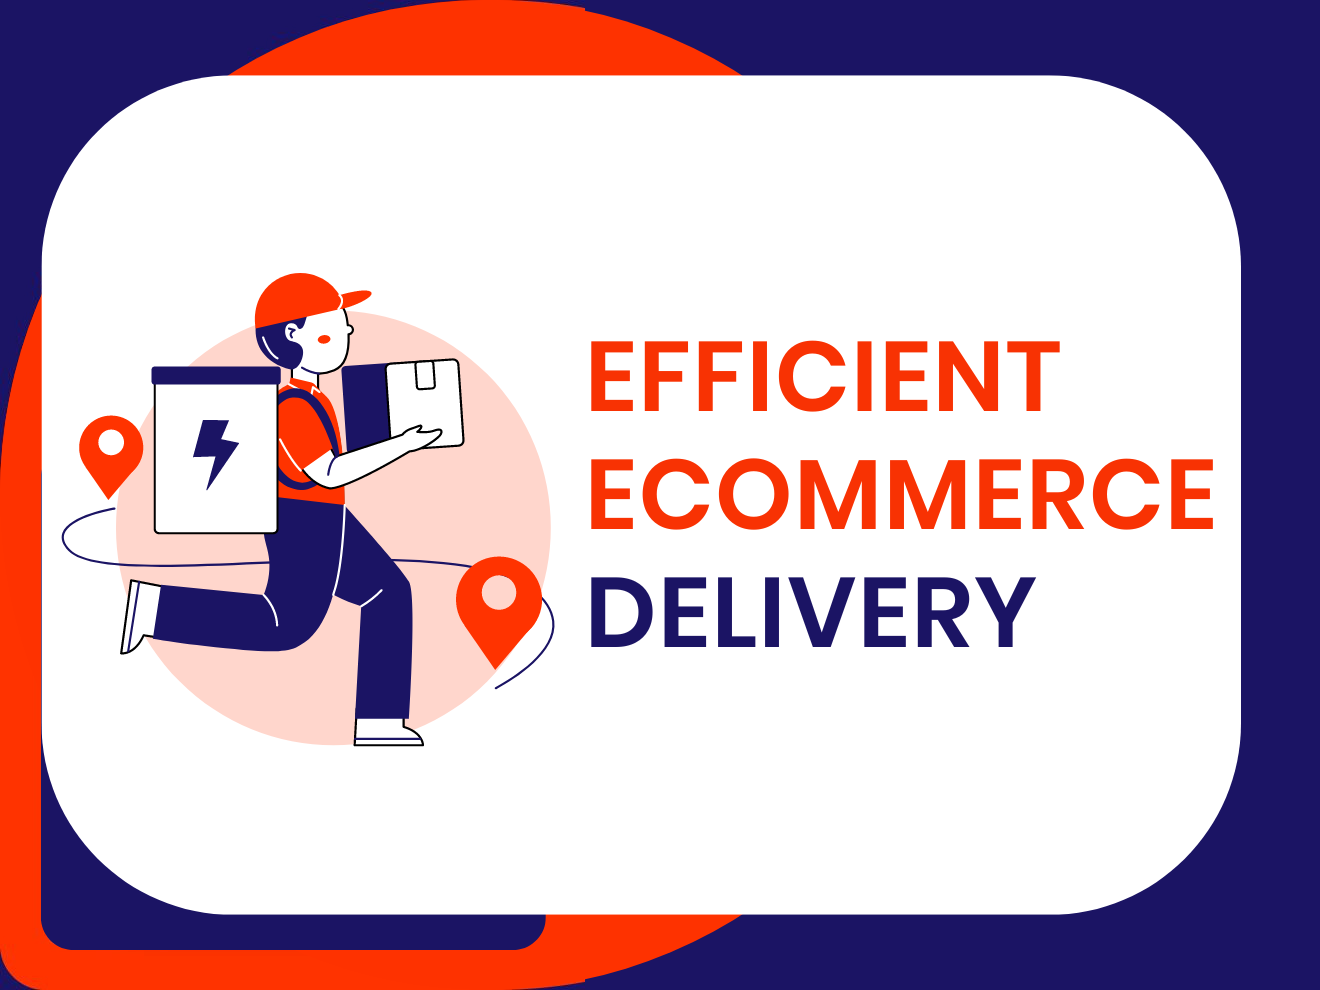 Efficient Ecommerce Delivery: Tips for Saving Money and Improving Shipping